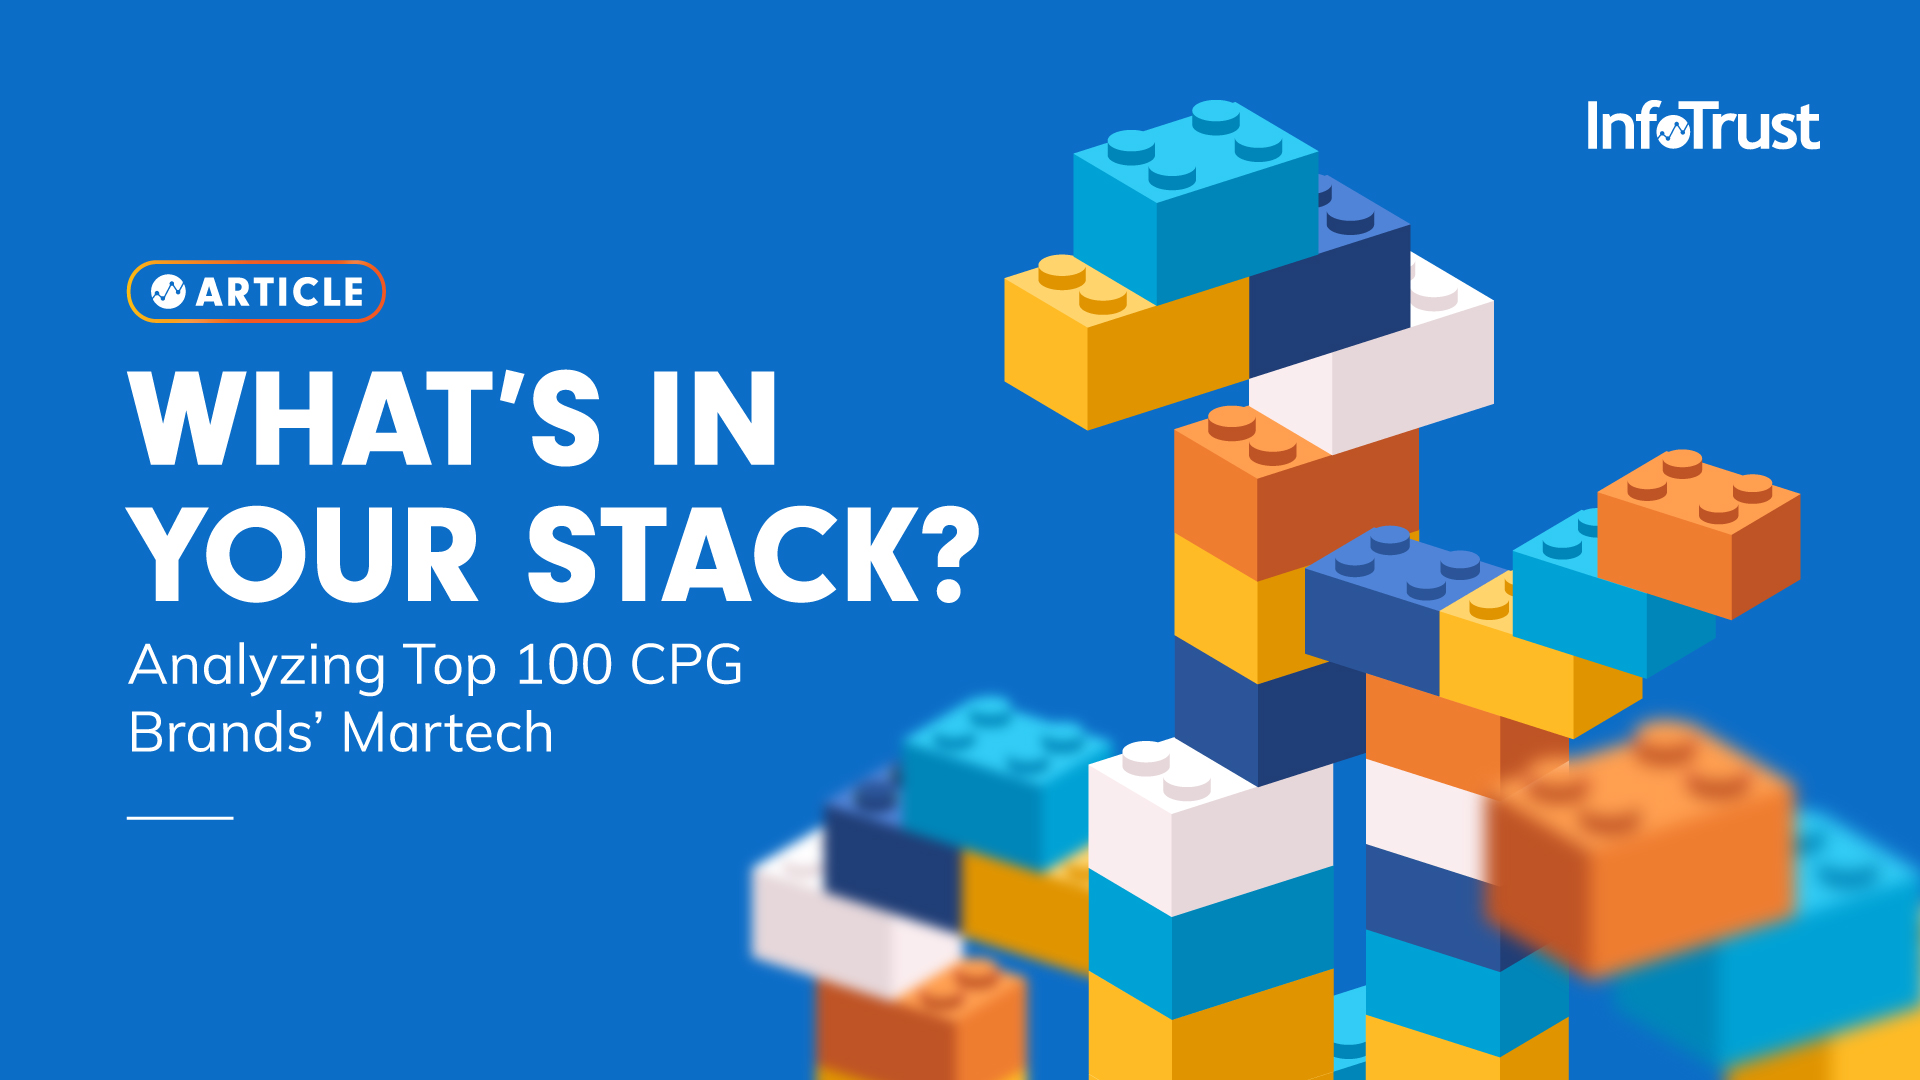 What's in Your Stack? Analyzing Top 100 CPG Brands’ Martech